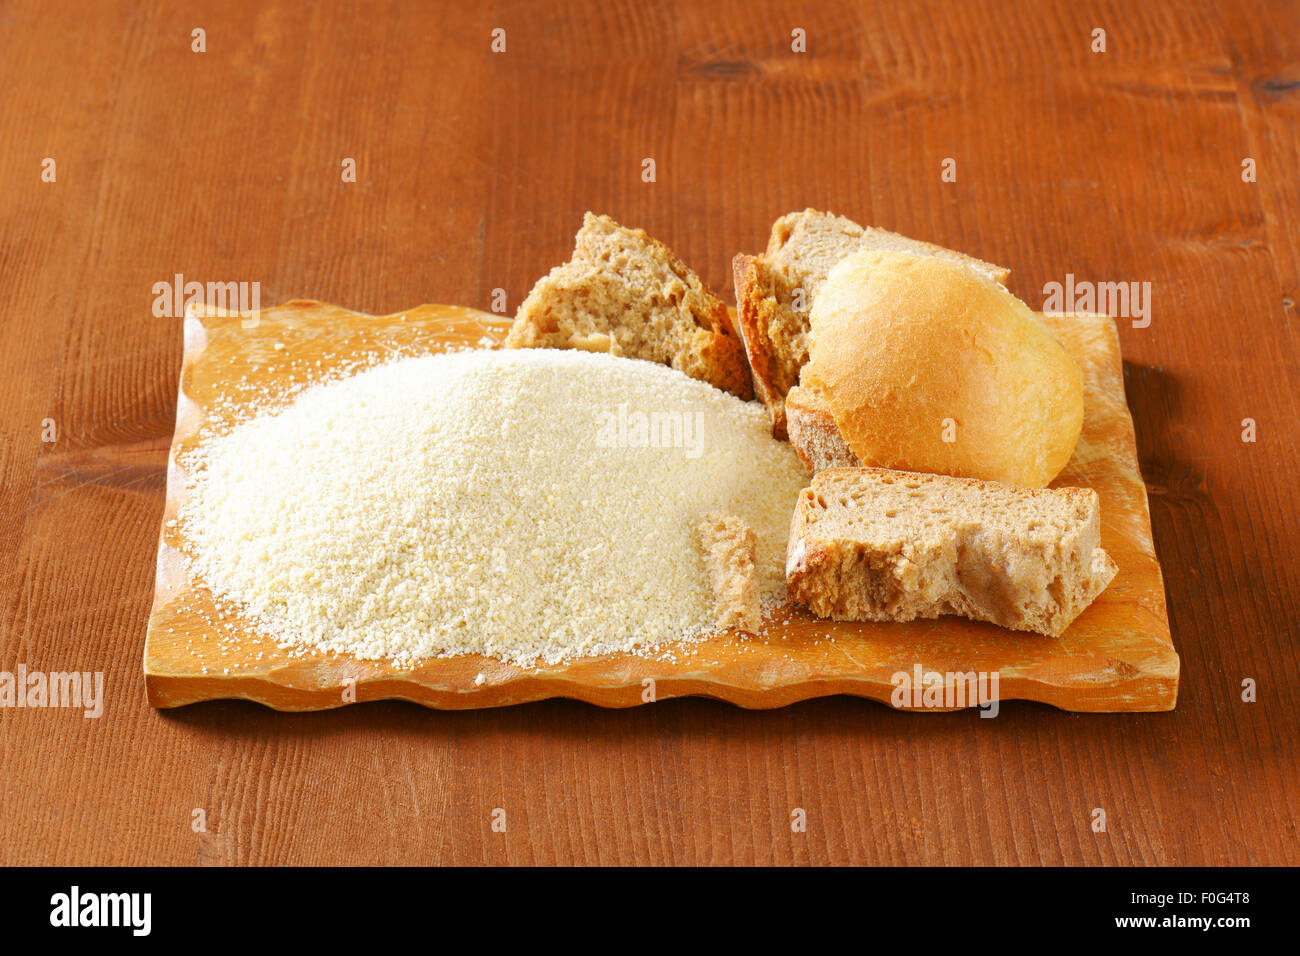 Pieces of stale bread and pile of finely ground bread crumbs Stock Photo